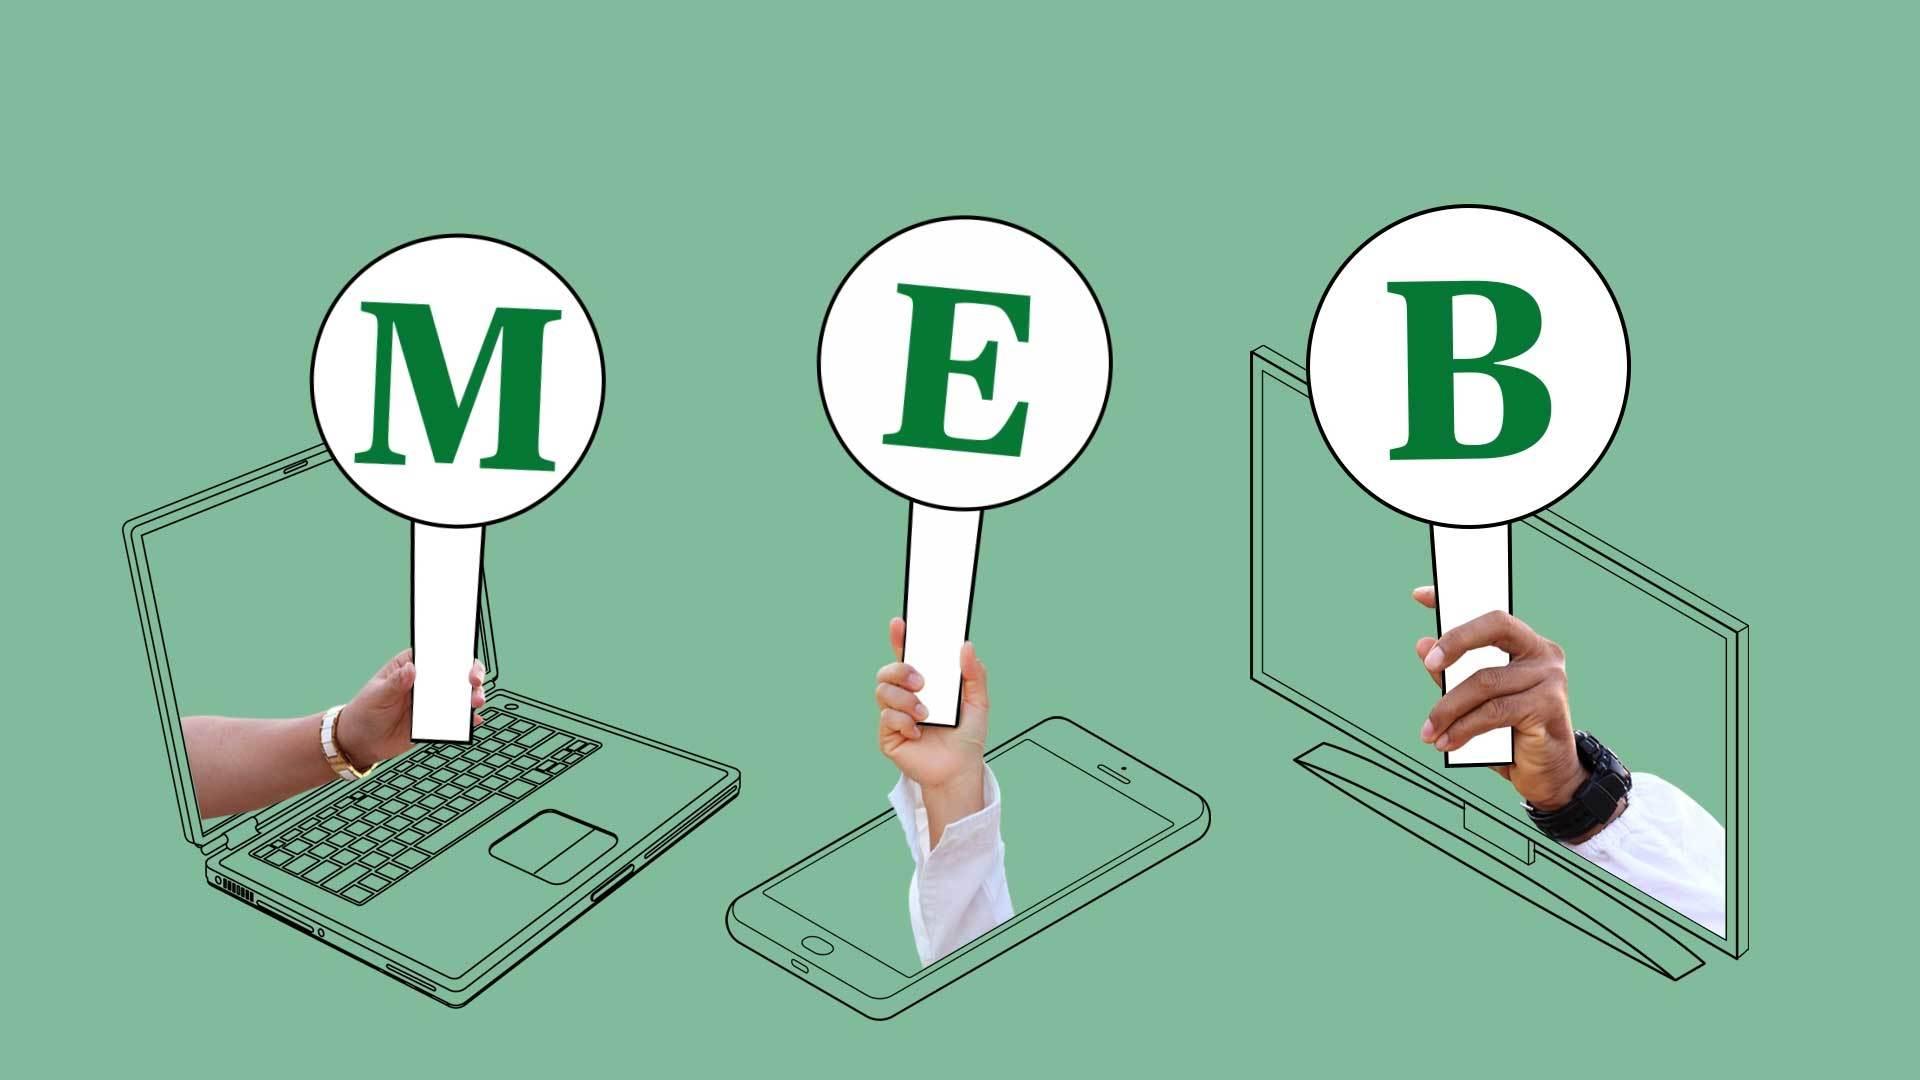 Green graphic with three hands coming out of different devices, each holding a sign with a letter: "M", "E", and "B"